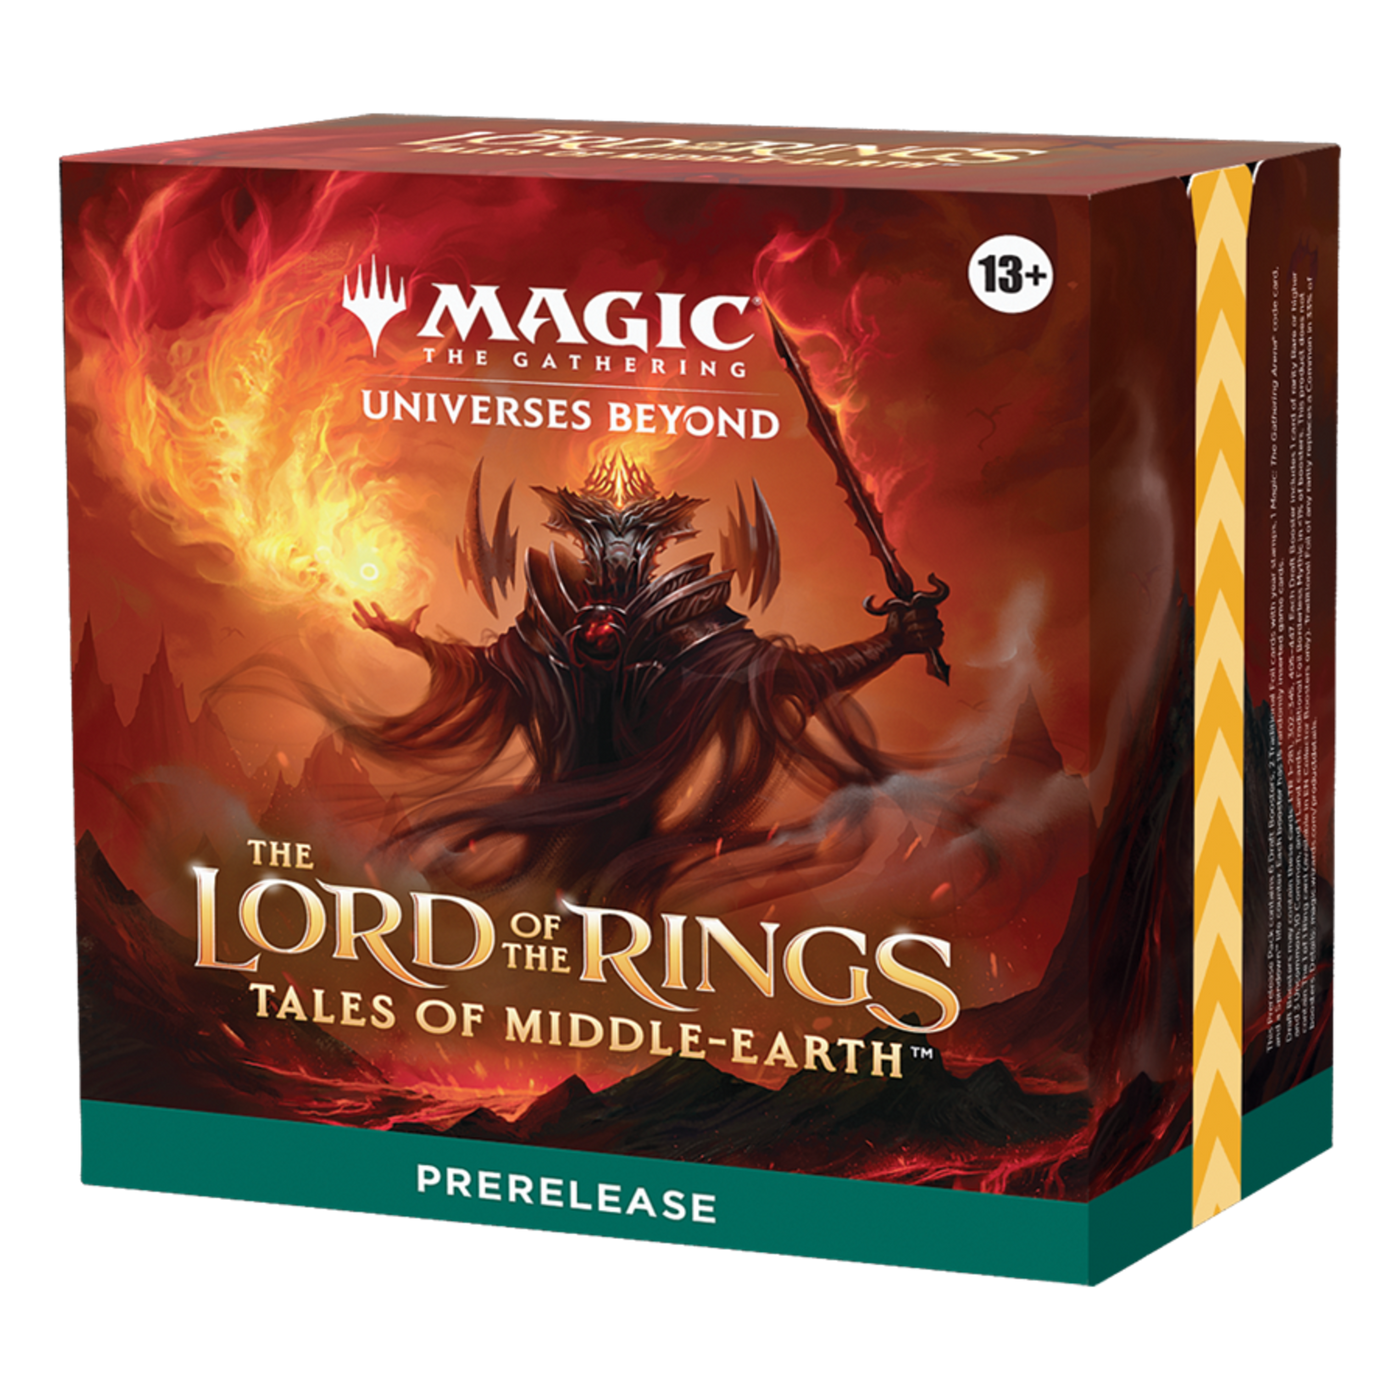 Magic: The Gathering – The Lord of the Rings: Tales of Middle-earth Prerelease Pack